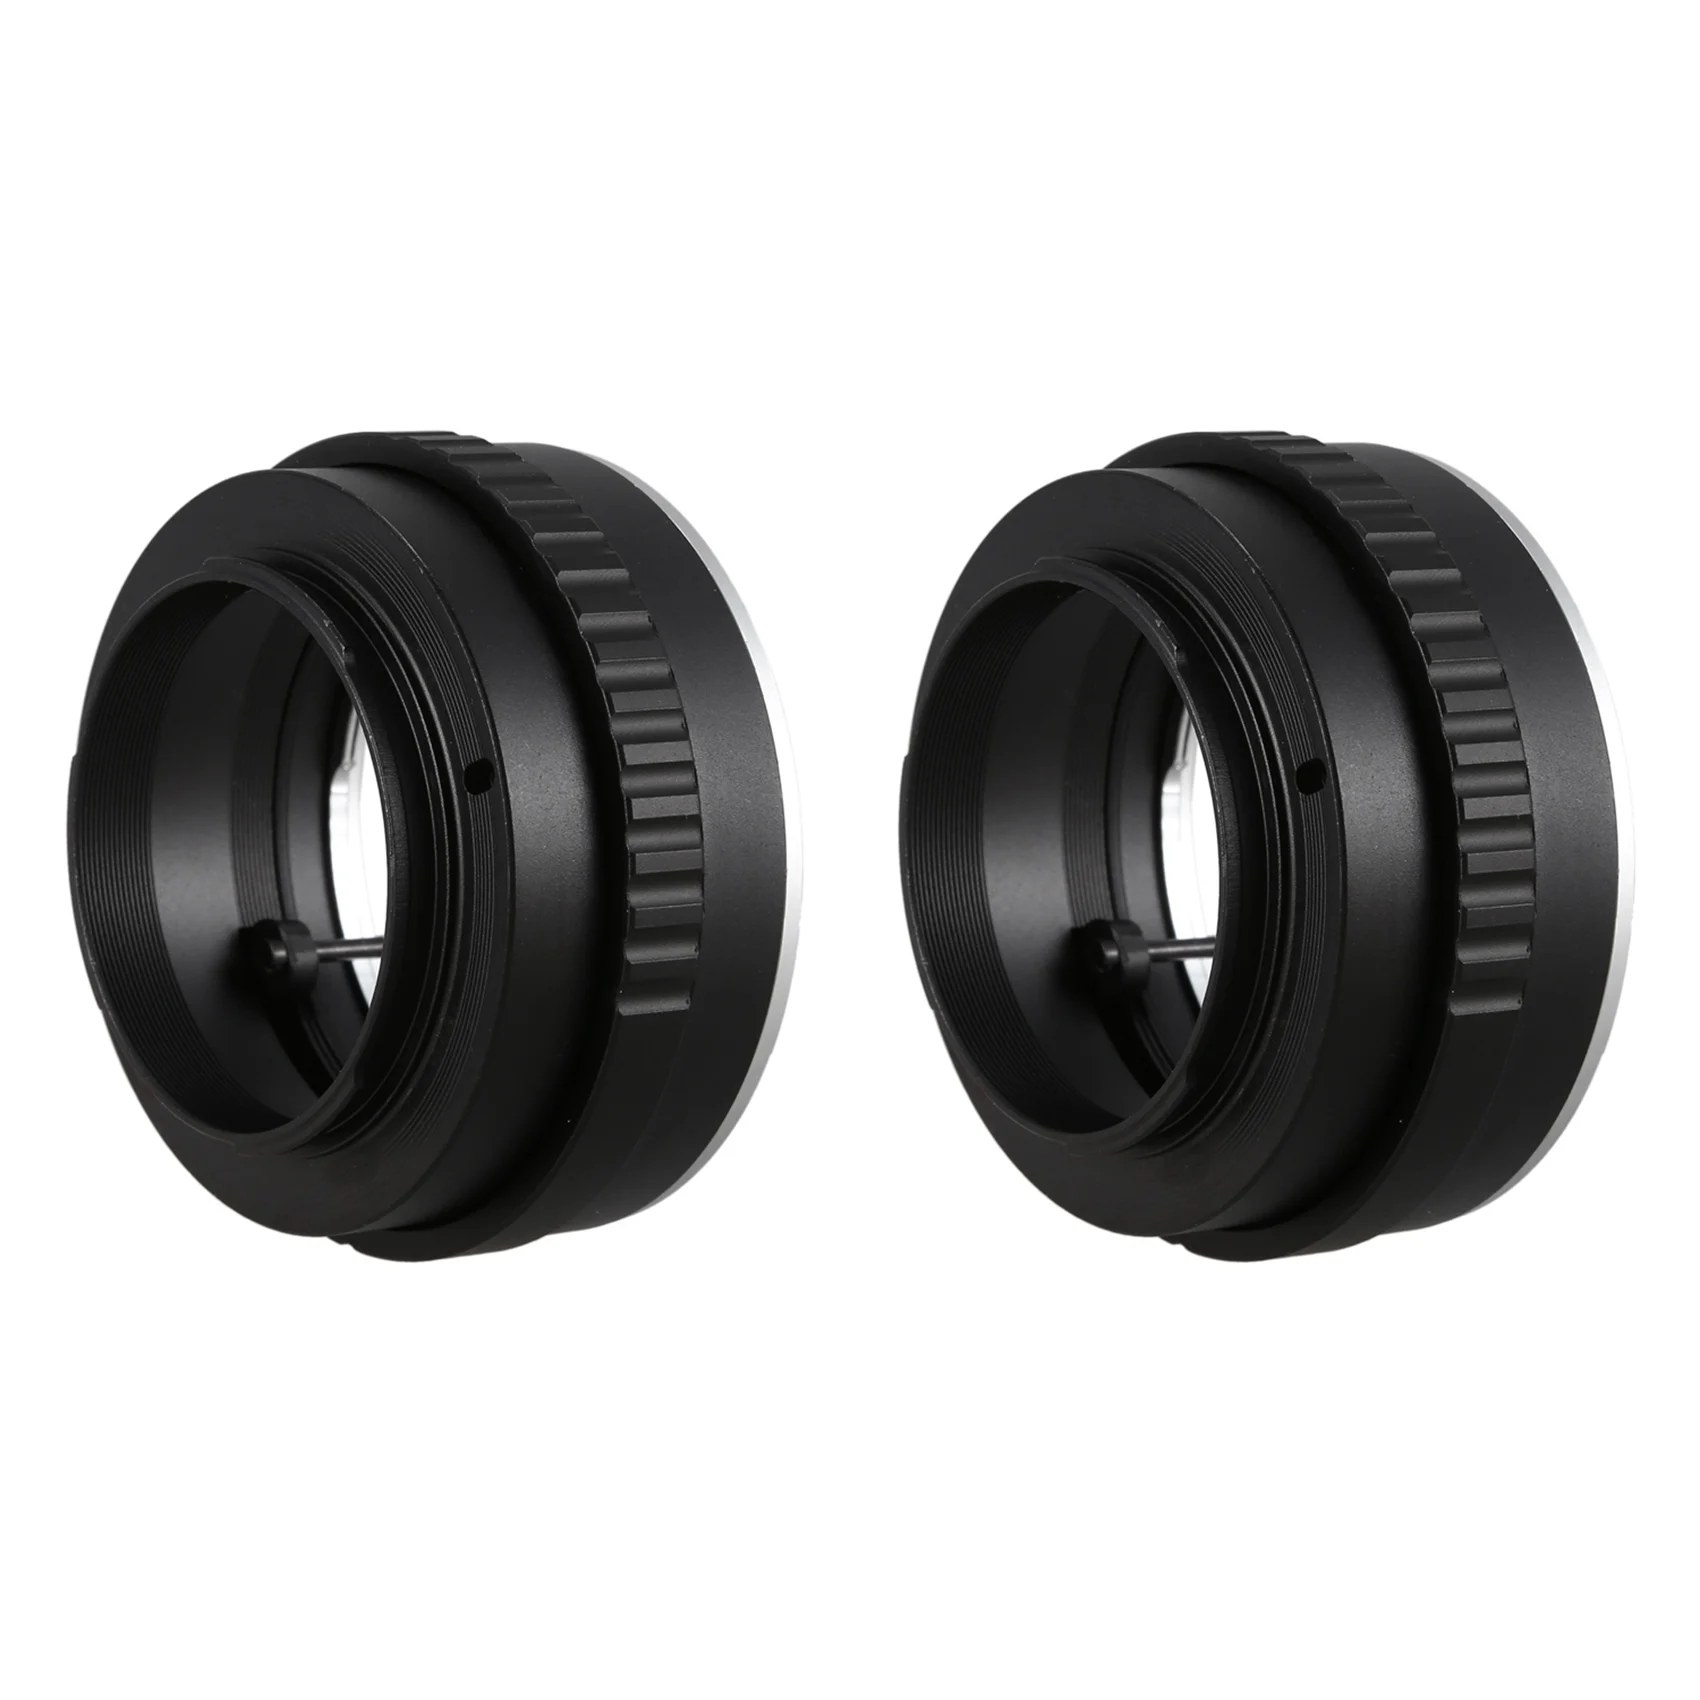 

2X Adapter Ring for Sony Alpha Minolta AF A-Type Lens to NEX 3,5,7 E-Mount Camera